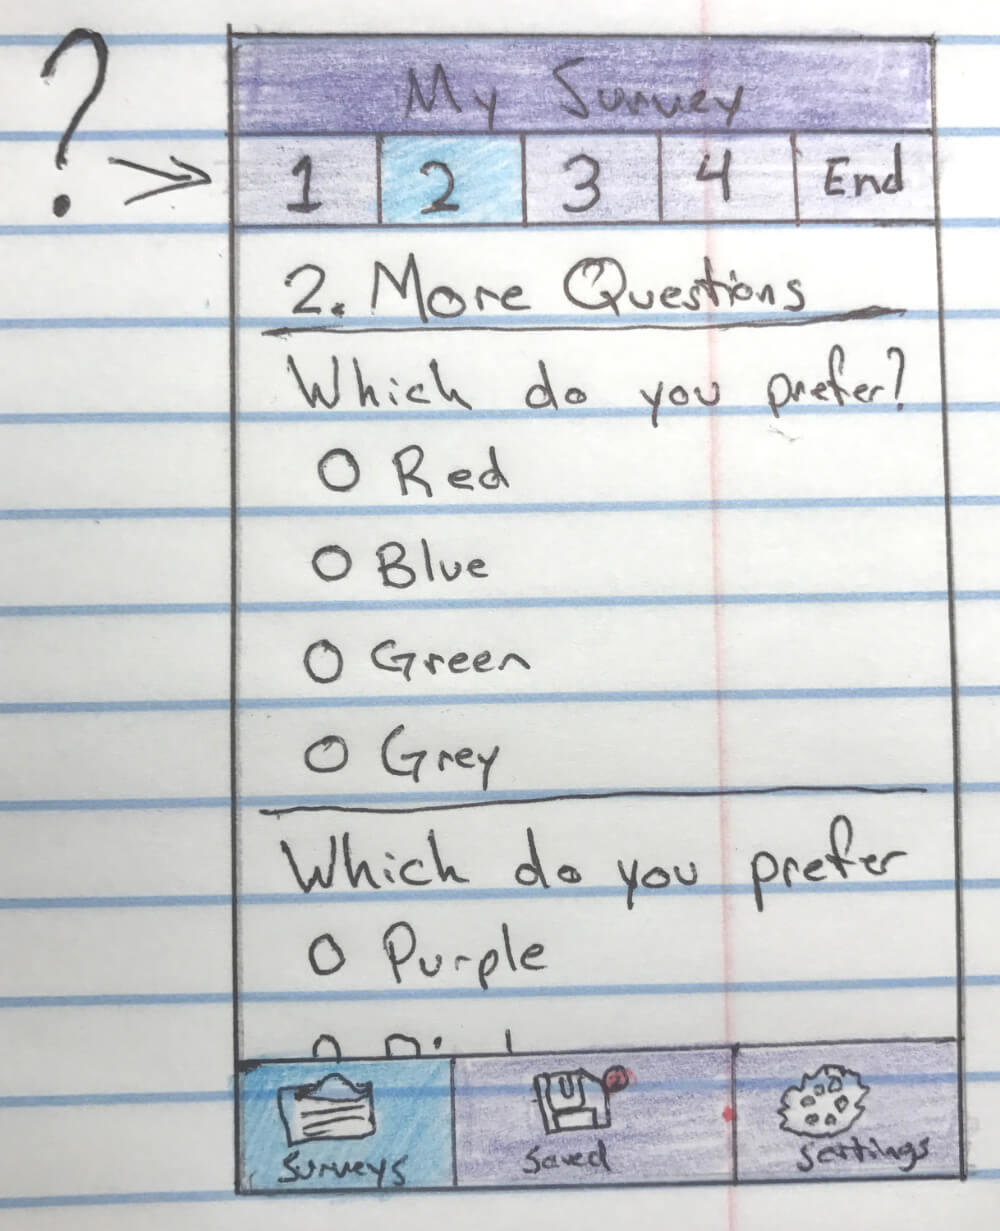 Sketch prototype for early UX tests